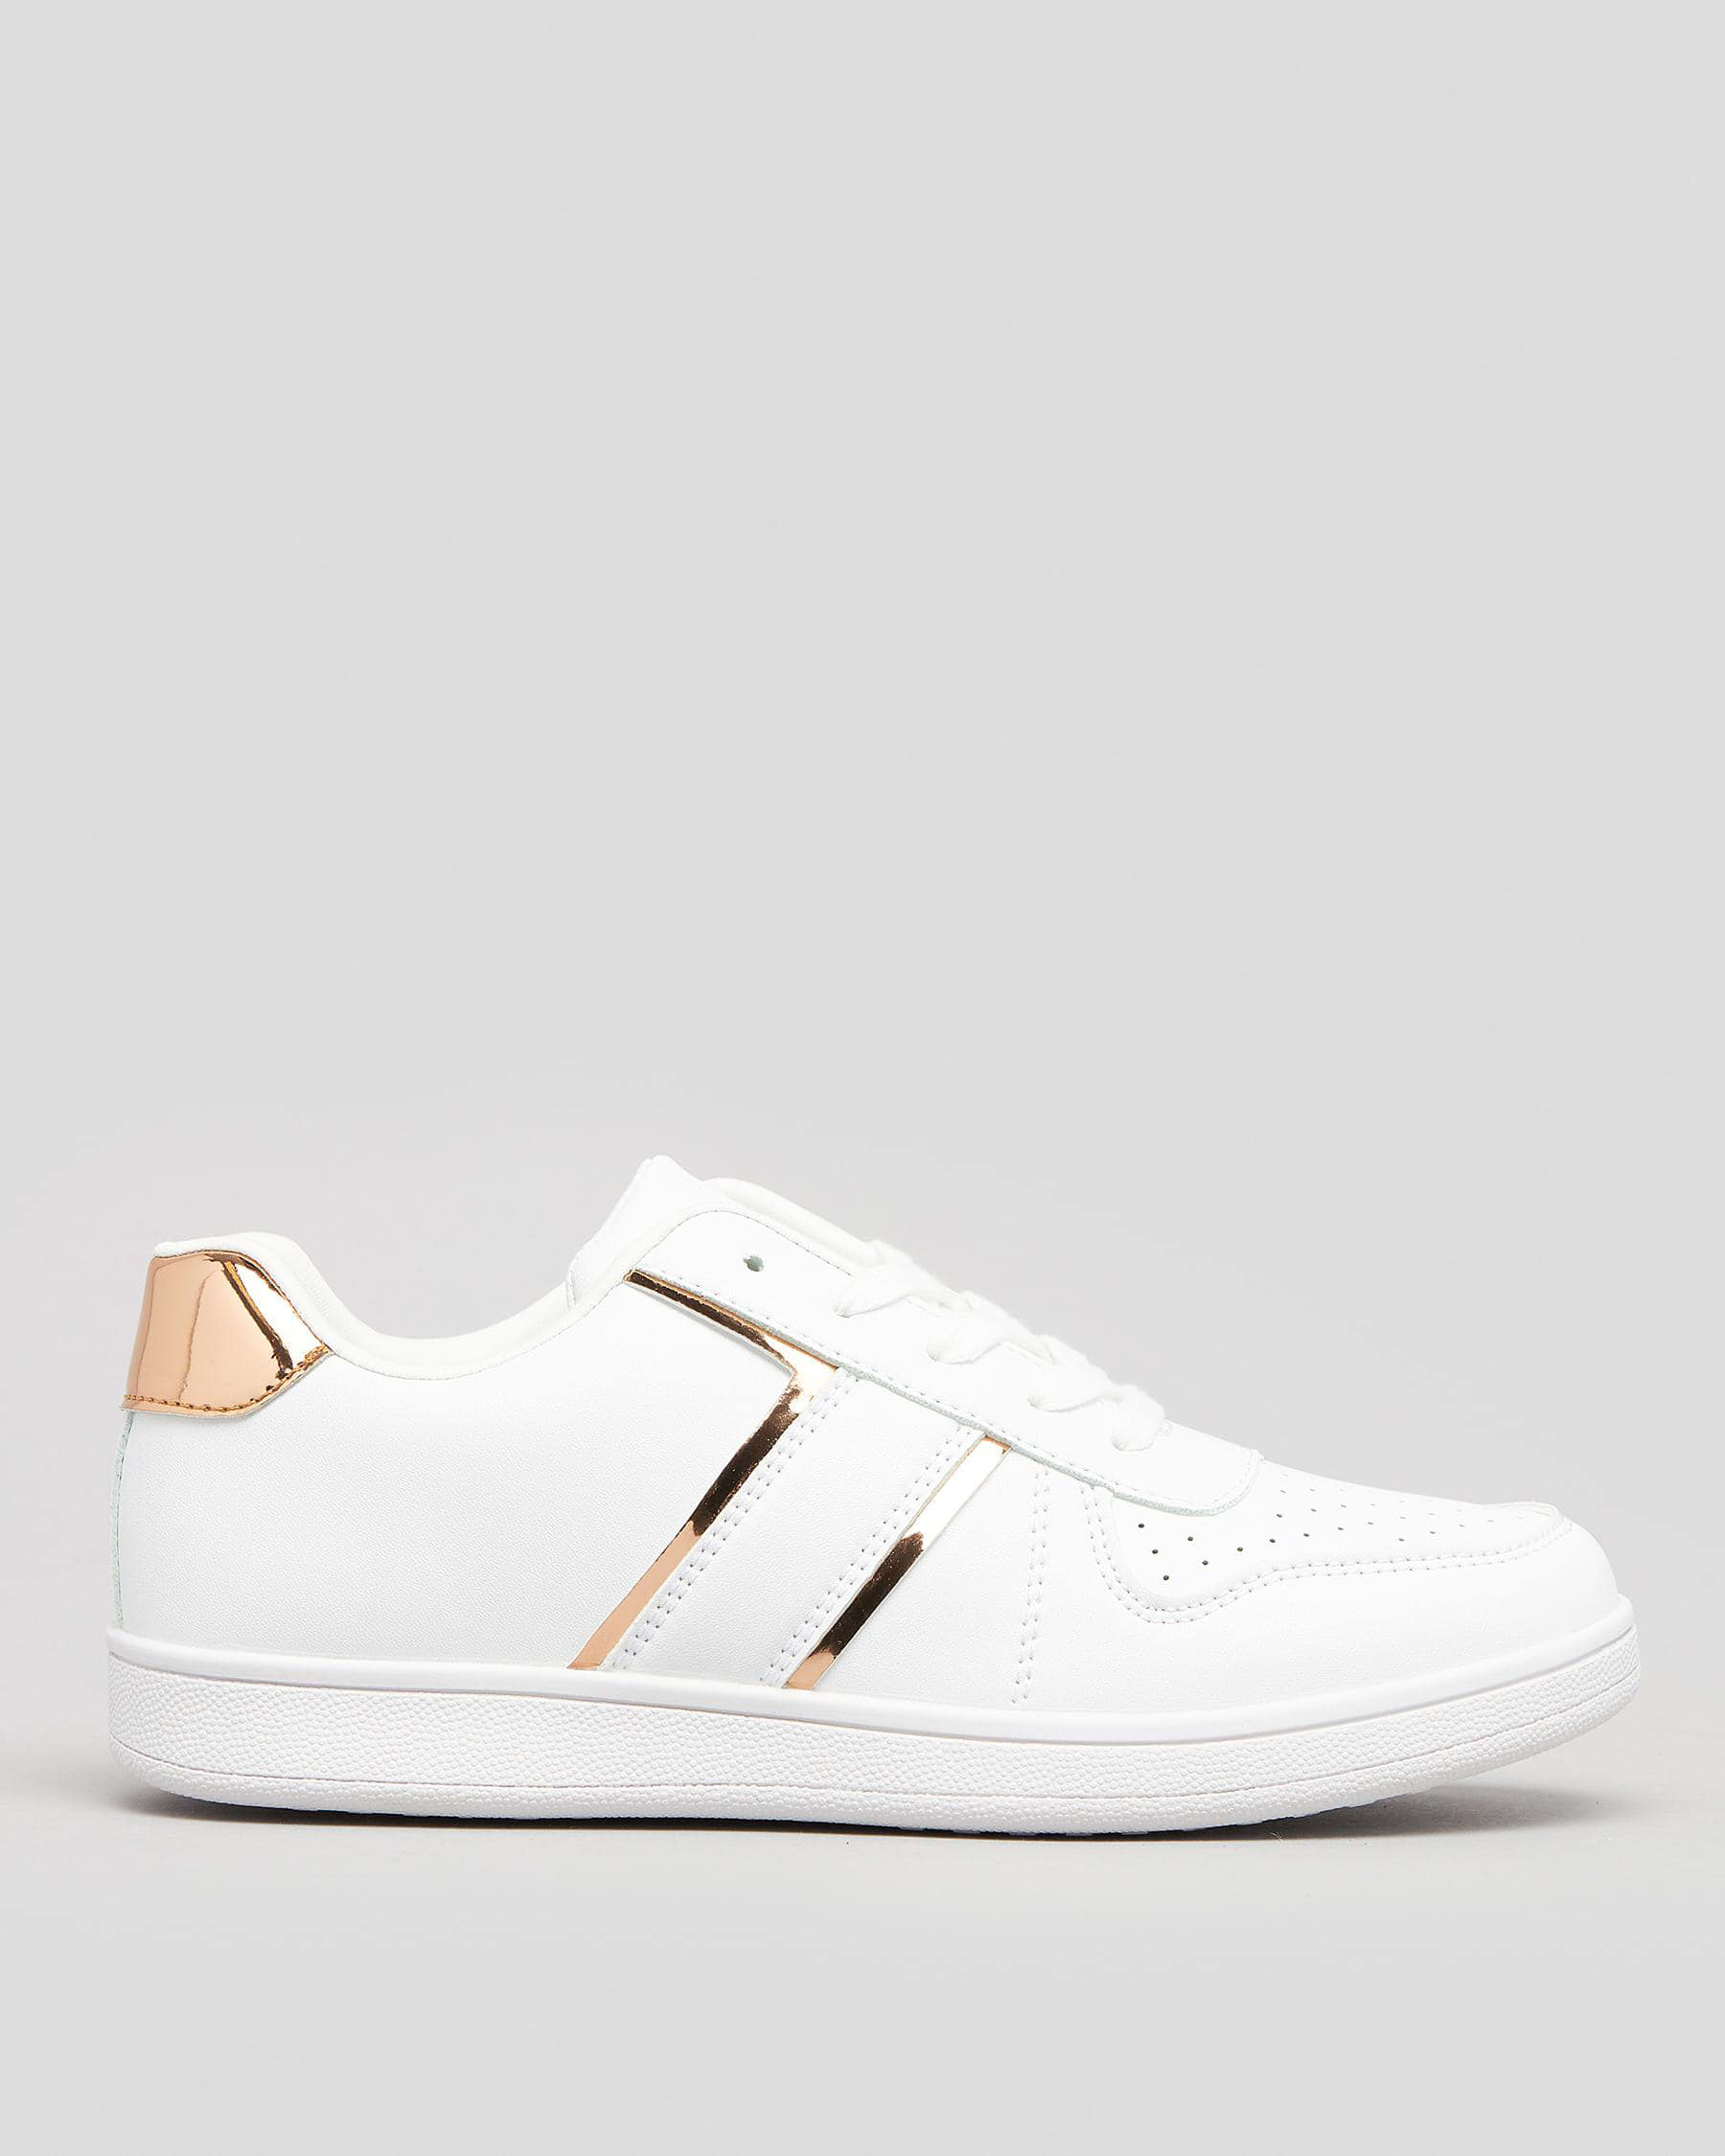 Shop Ava And Ever Ezra Shoes In White/rose Gold - Fast Shipping & Easy ...